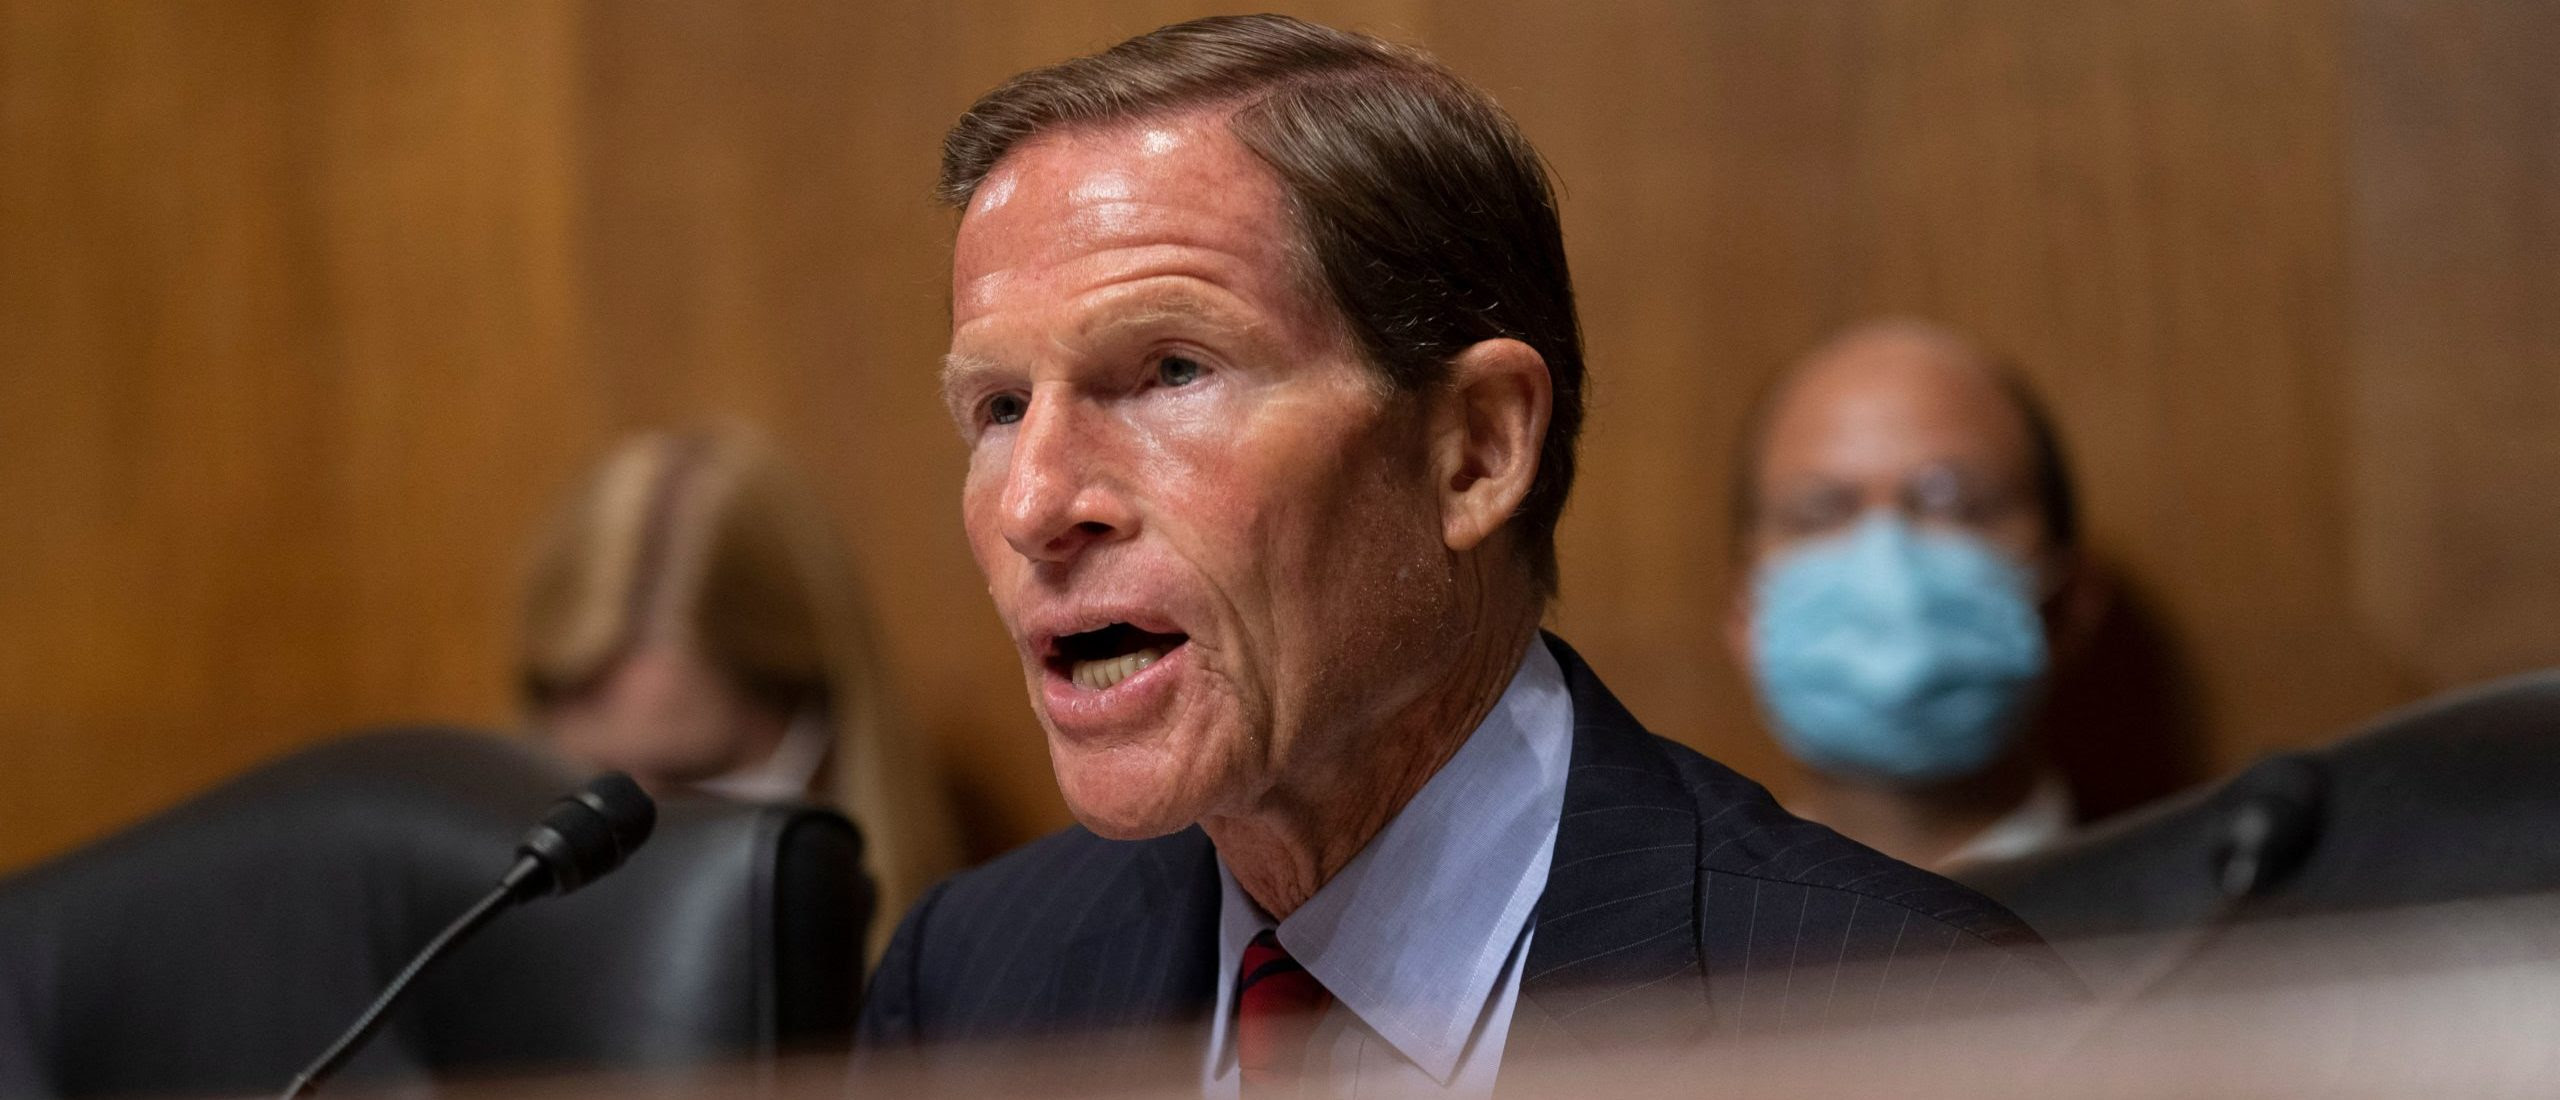 Sen. Blumenthal Says He Wouldn’t Have Gone To Communist Party Awards If He Knew ‘The Details’